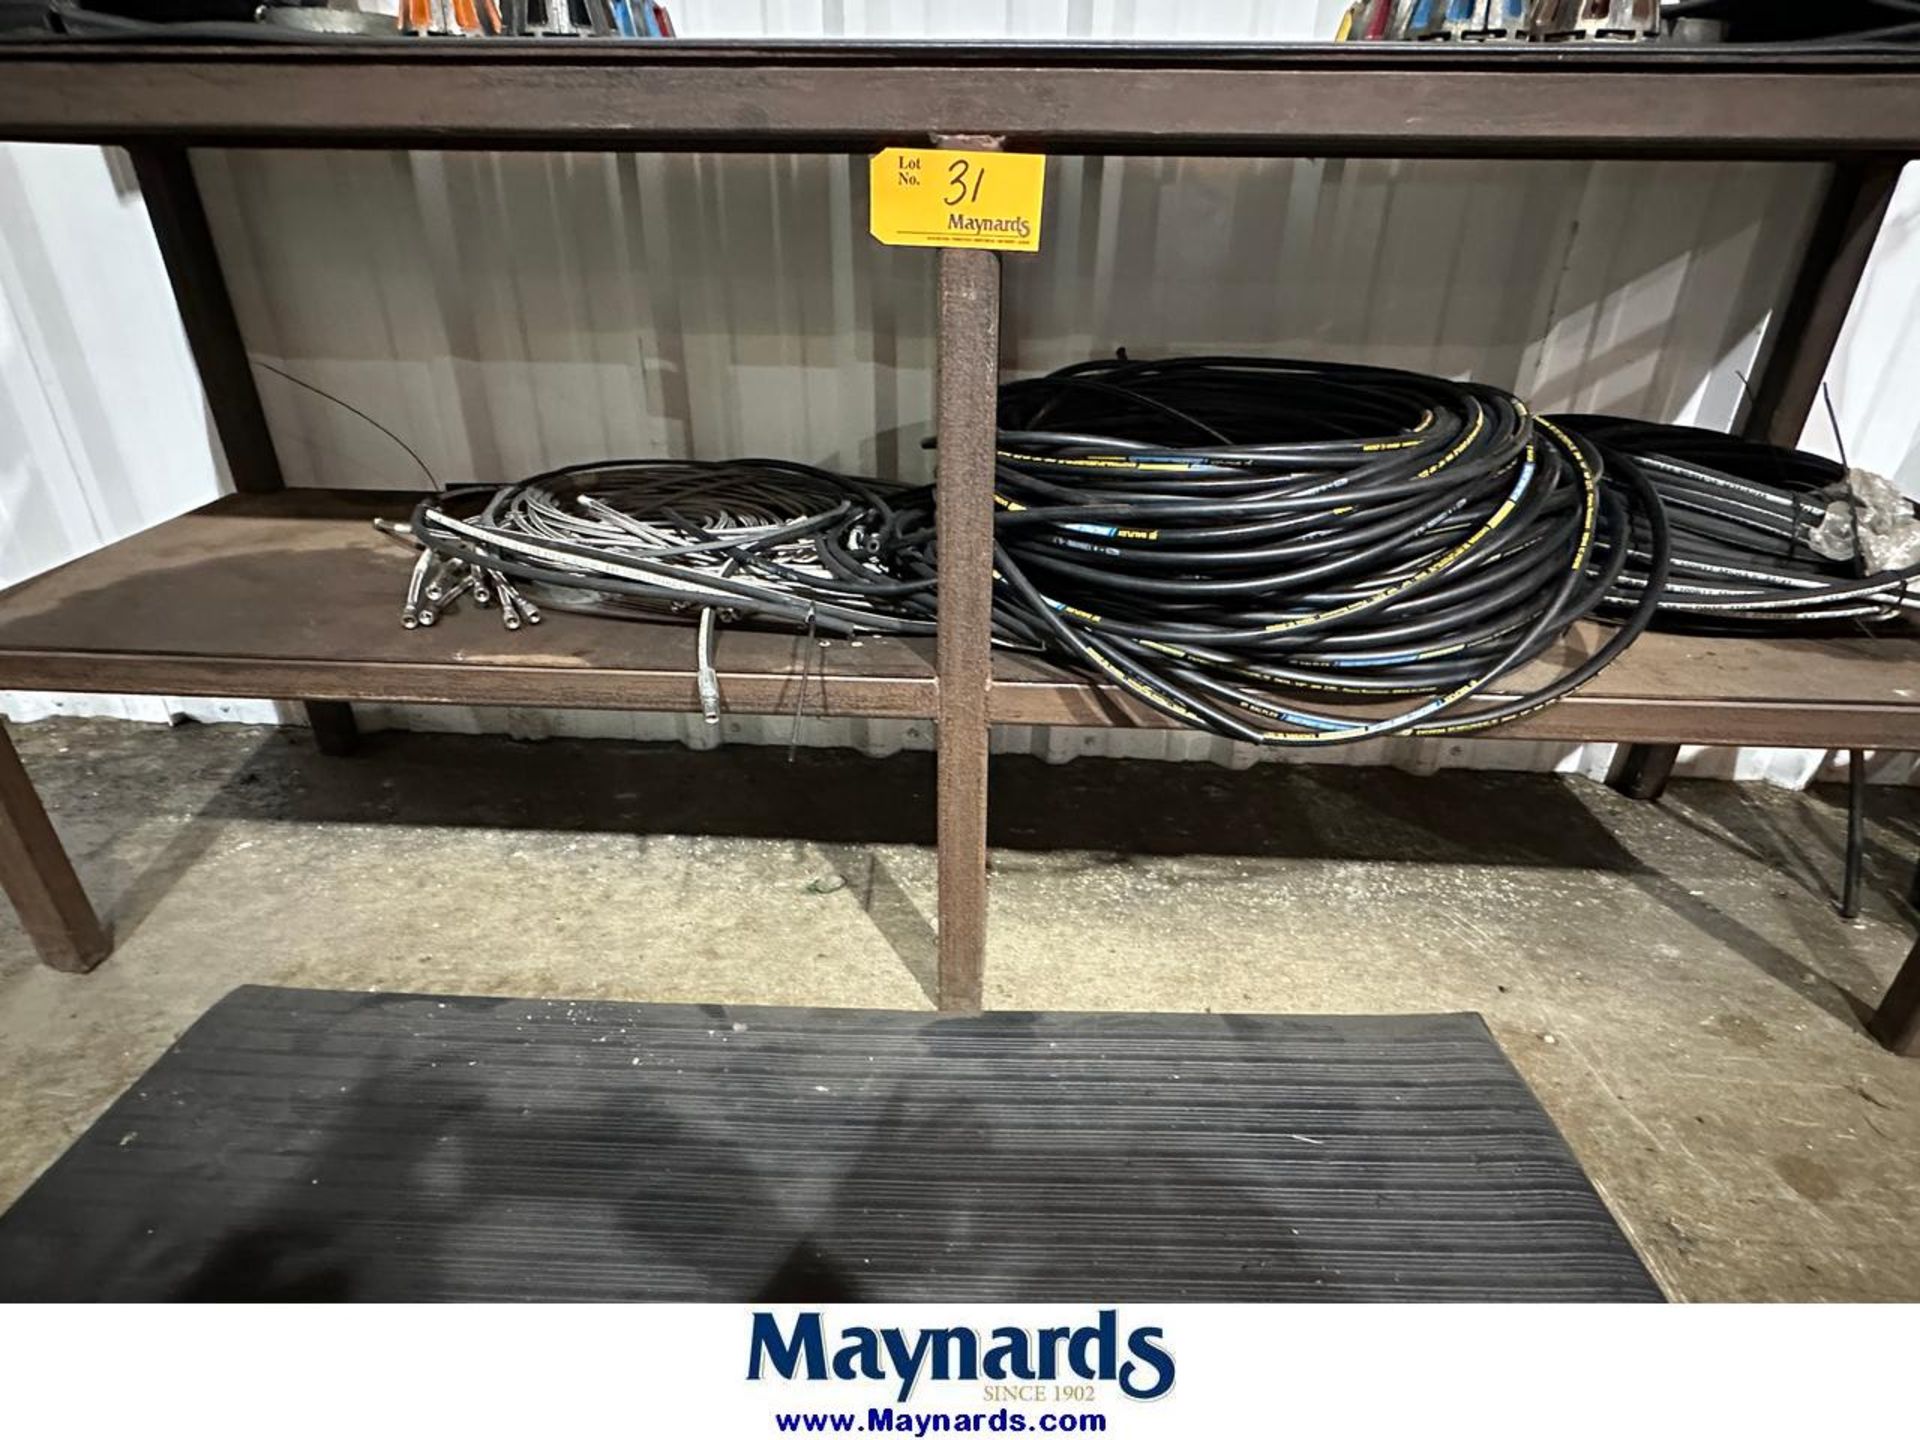 Lot of Hoses, Fittings, Steel Table and Bins